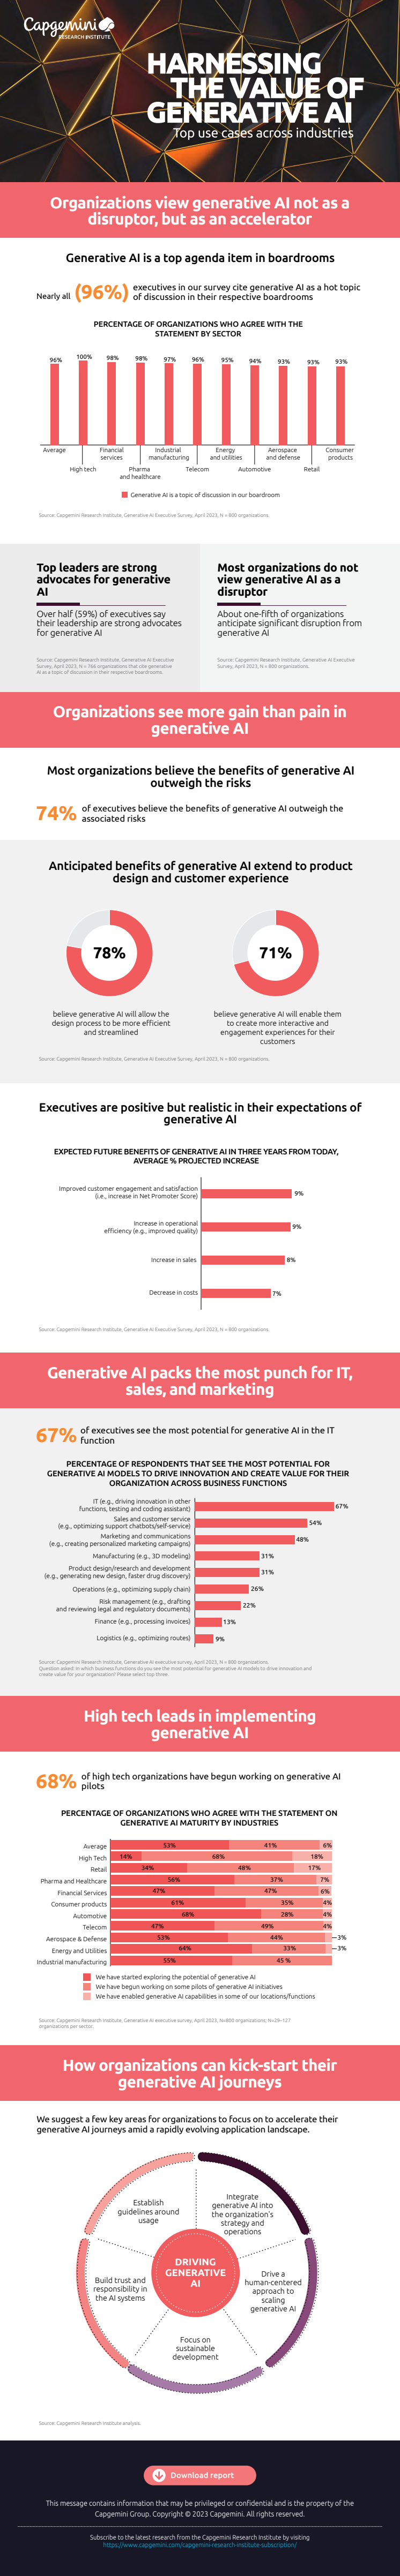 Final-Infographic-Harnessing-the value-of-Gen-AI.pdf